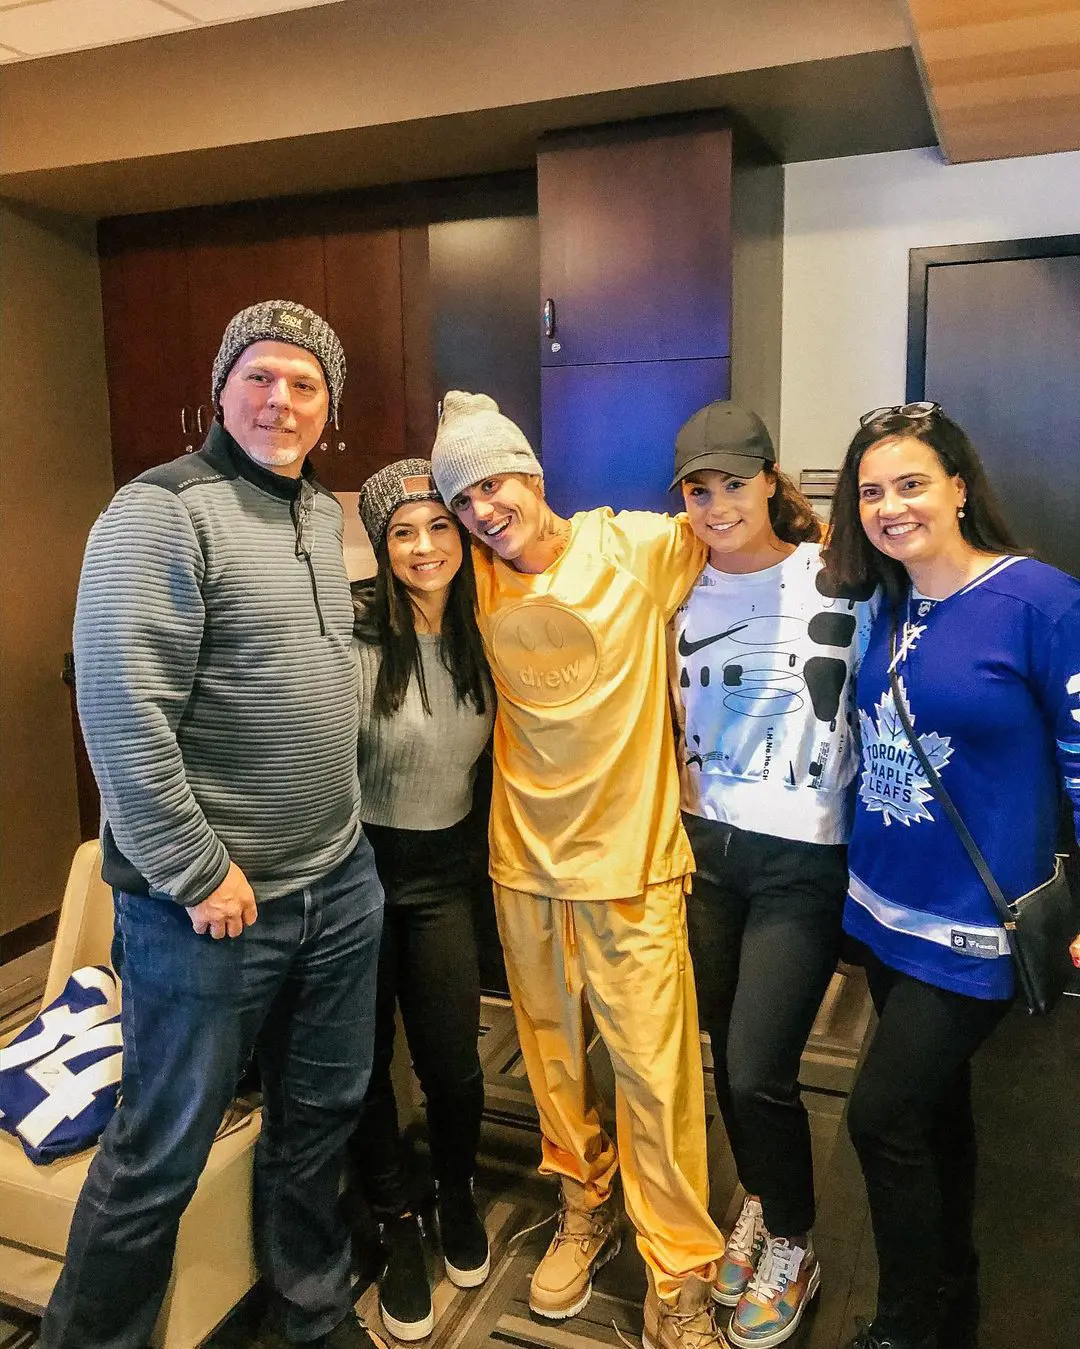 Brian (left) and Ema (right) with their two daughters Alexandria and Breyana with singer Justin Bieber in Toronto, Ontario in Jan 2020